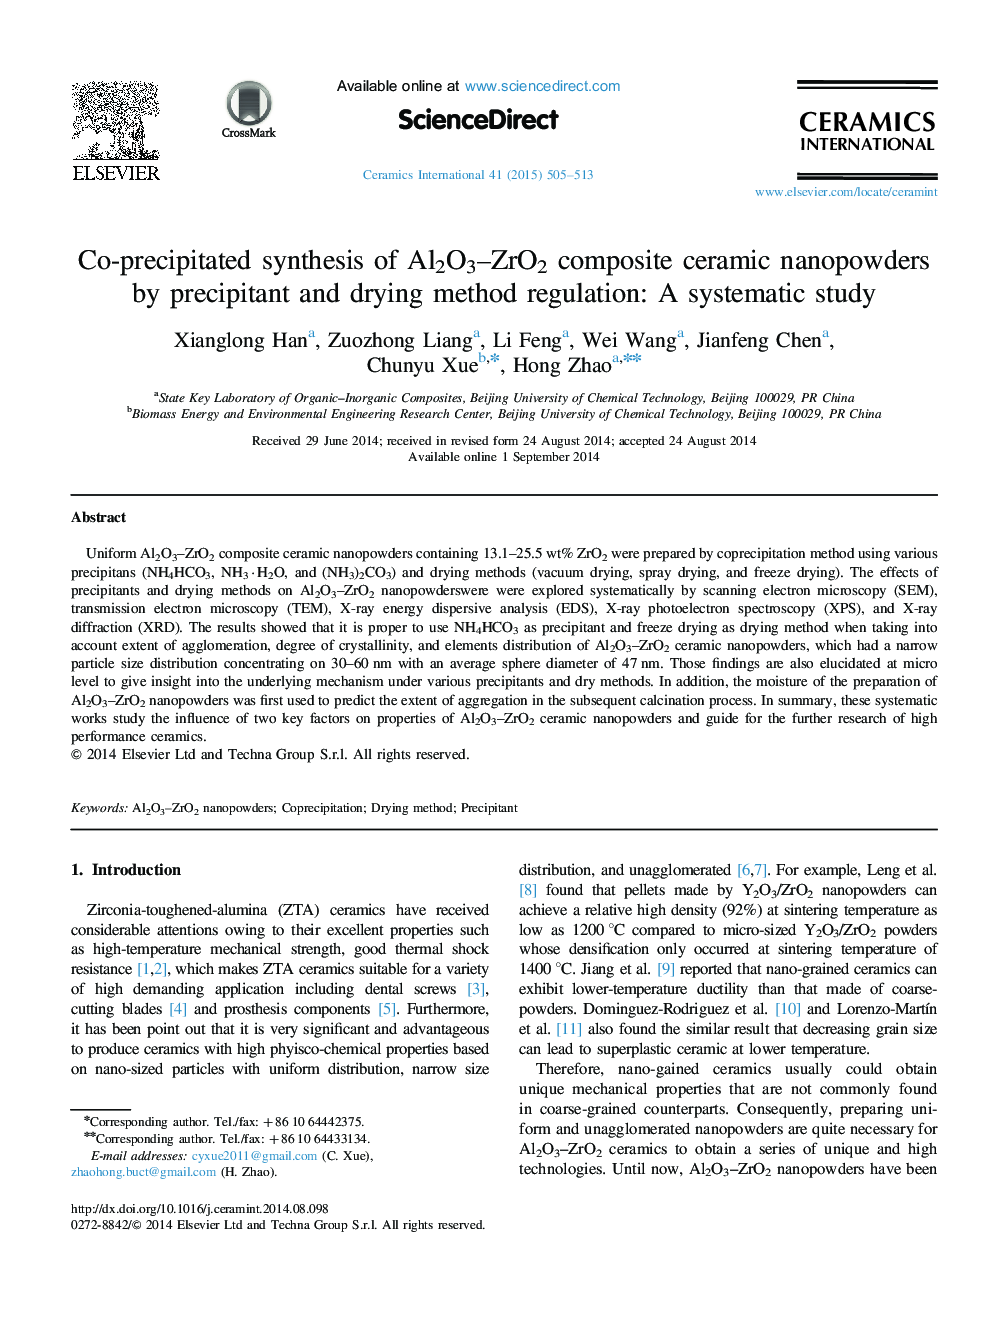 Co-precipitated synthesis of Al2O3–ZrO2 composite ceramic nanopowders by precipitant and drying method regulation: A systematic study